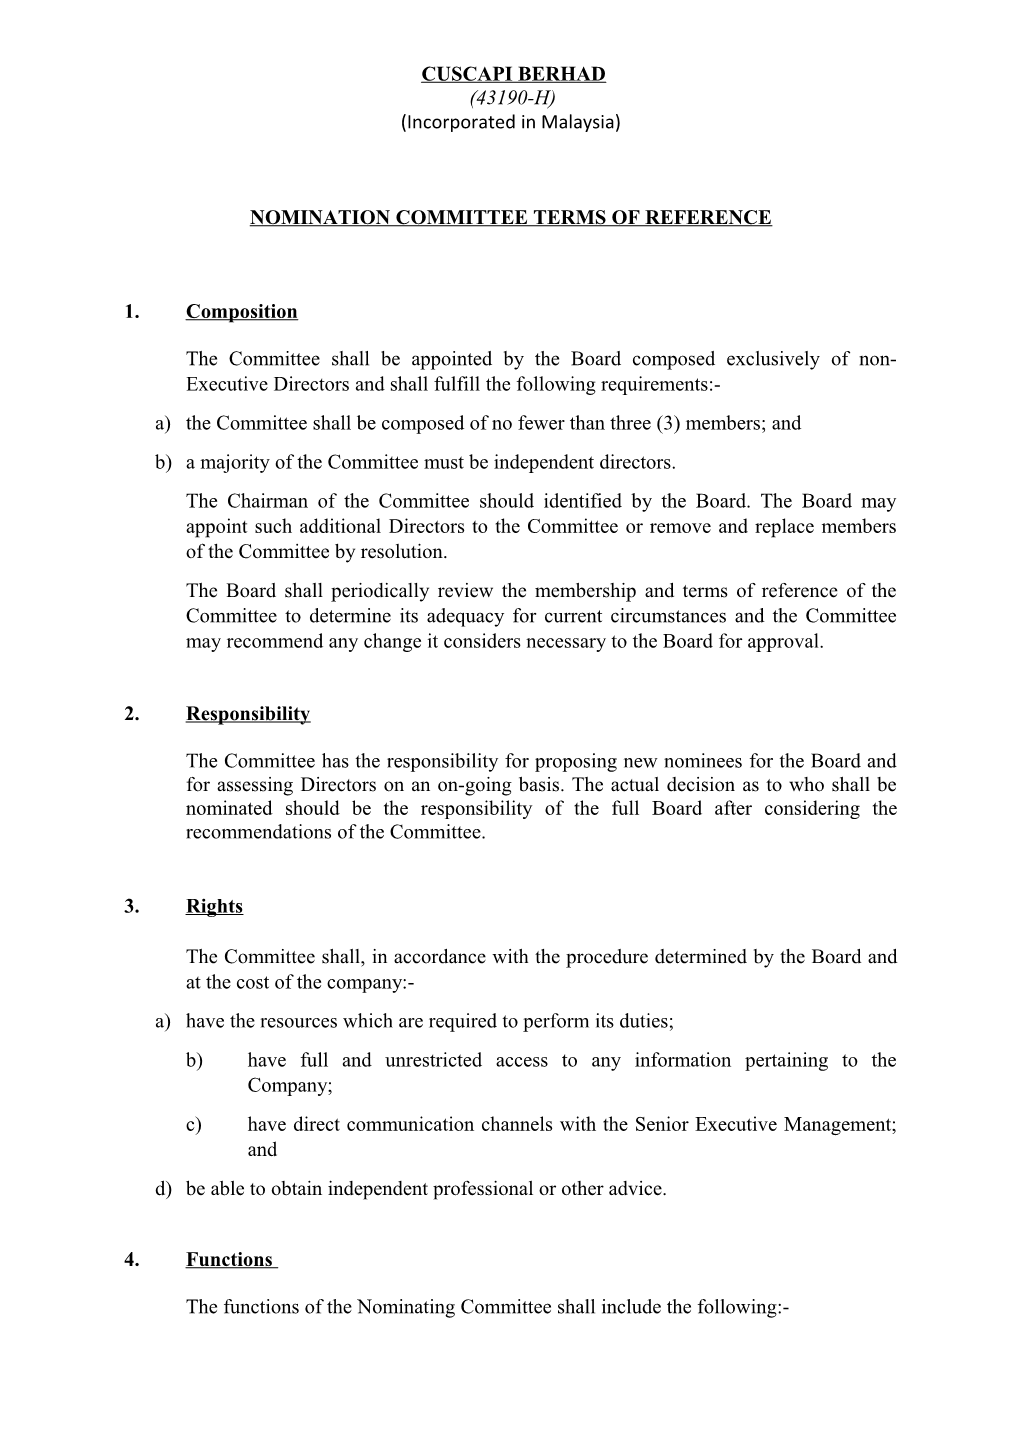 Nomination Committee Terms of Reference